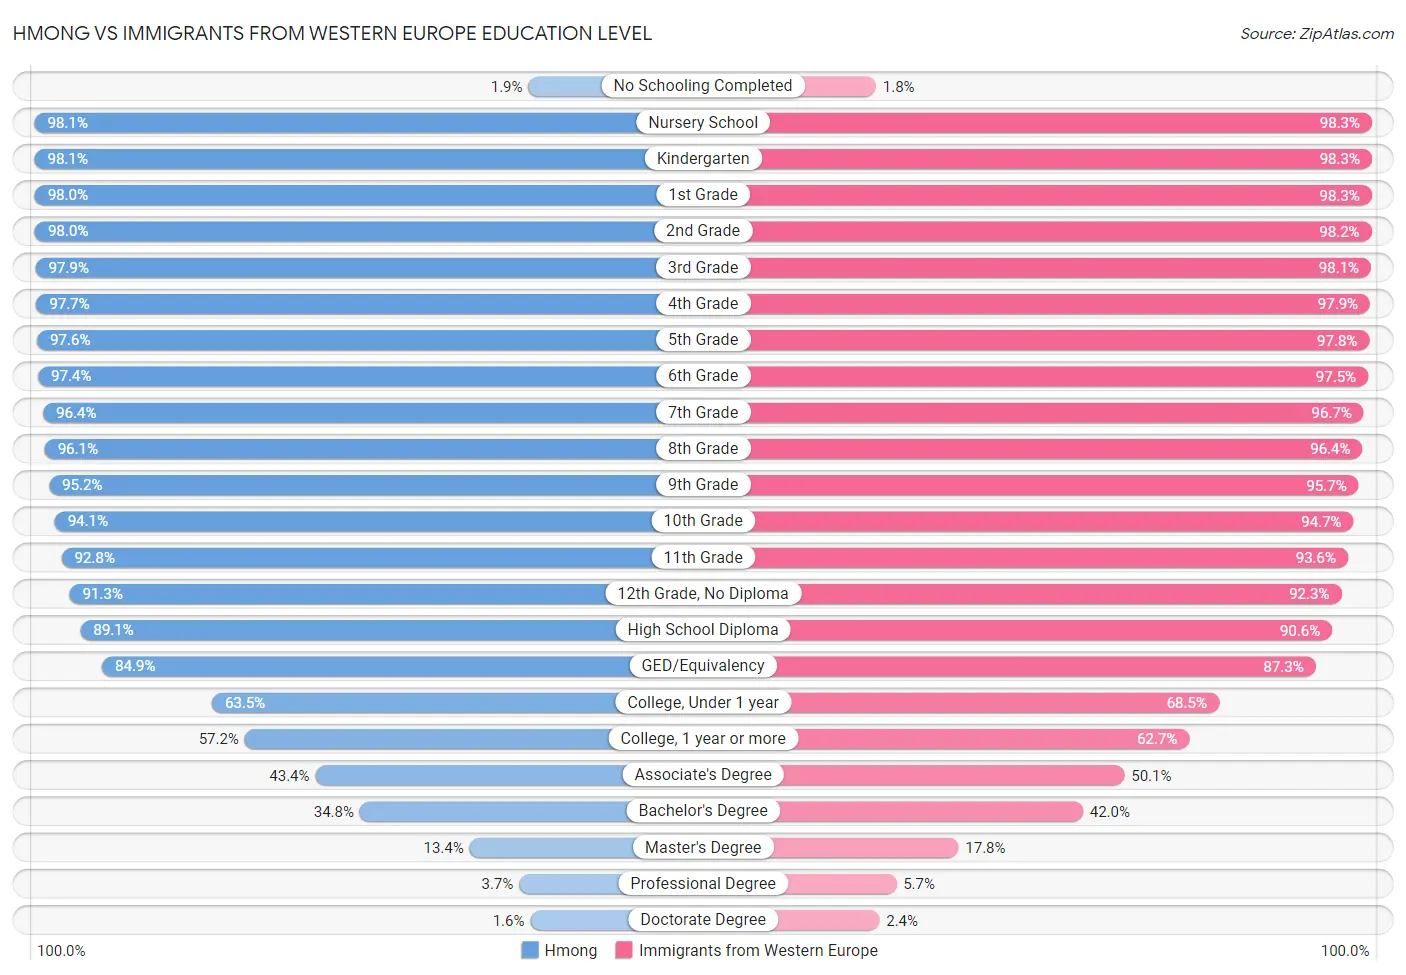 Hmong vs Immigrants from Western Europe Education Level